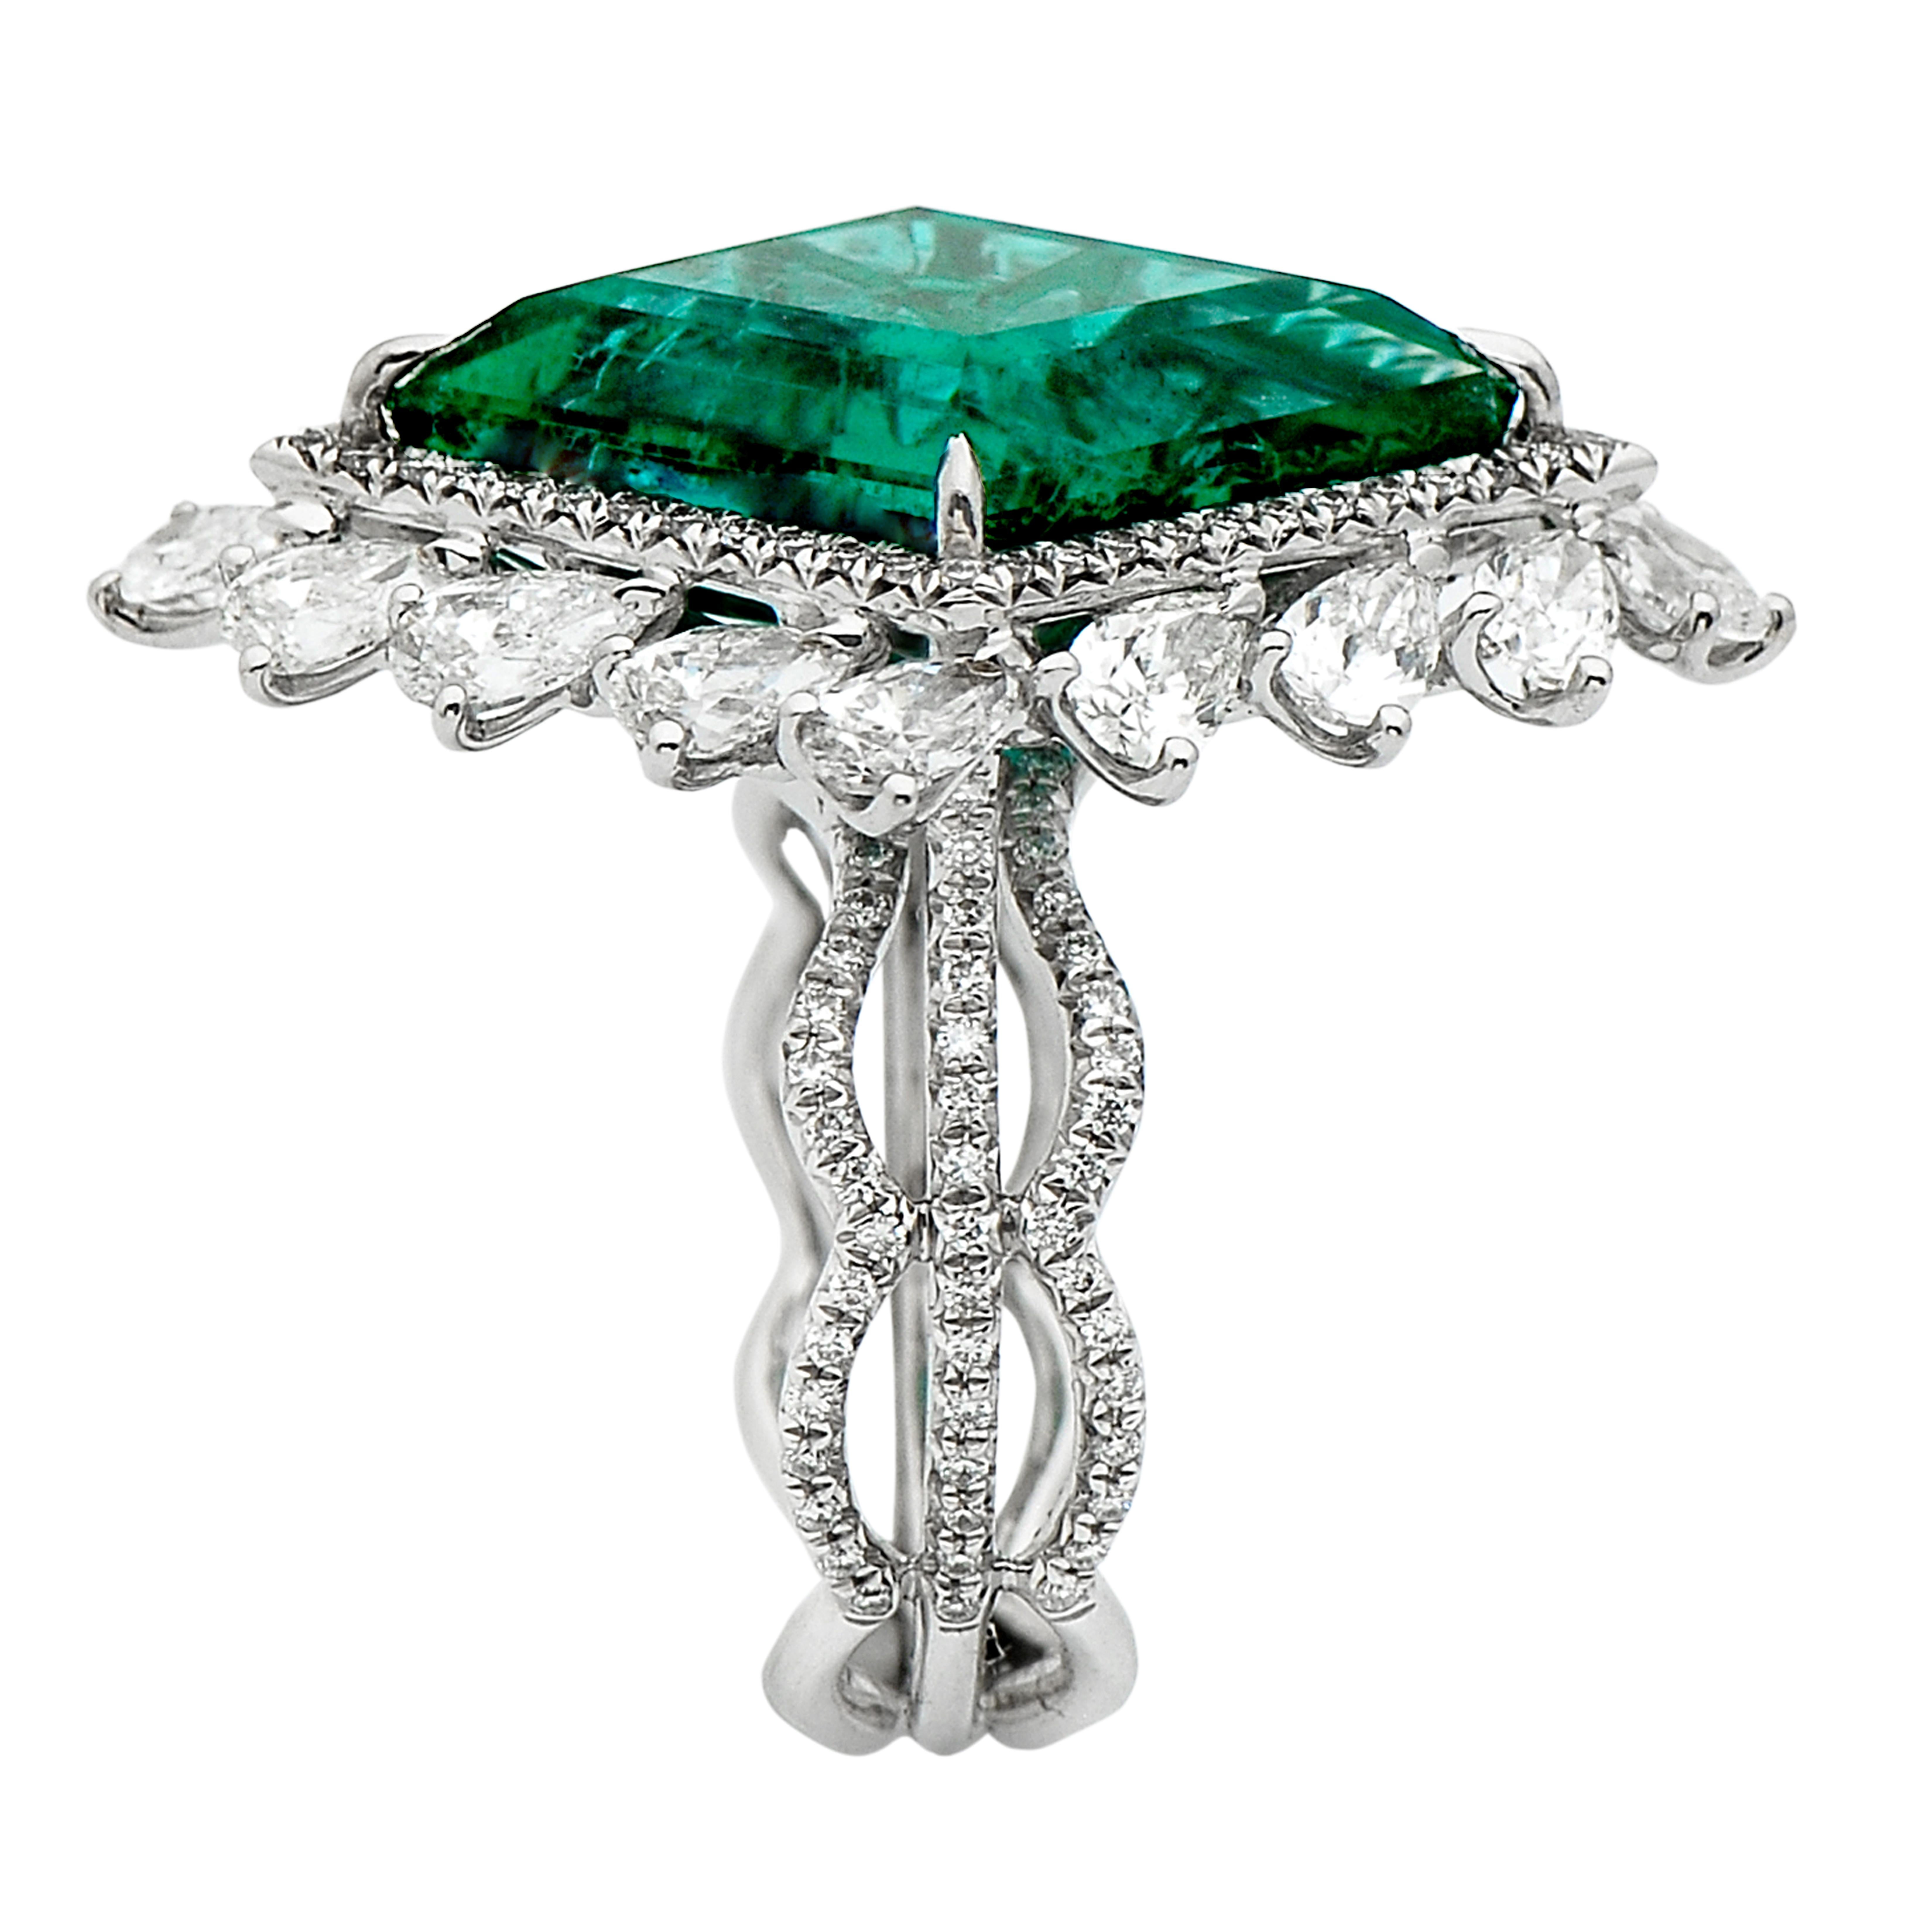 18 Karat white gold ring from Laviere's Viridian collection. This ring is set with a Trapeze shape GIA certified Emerald weighing 9.23 carats and is surrounded with 2.83 carats of brilliant pear shape diamonds and 0.72 carats of round brilliant